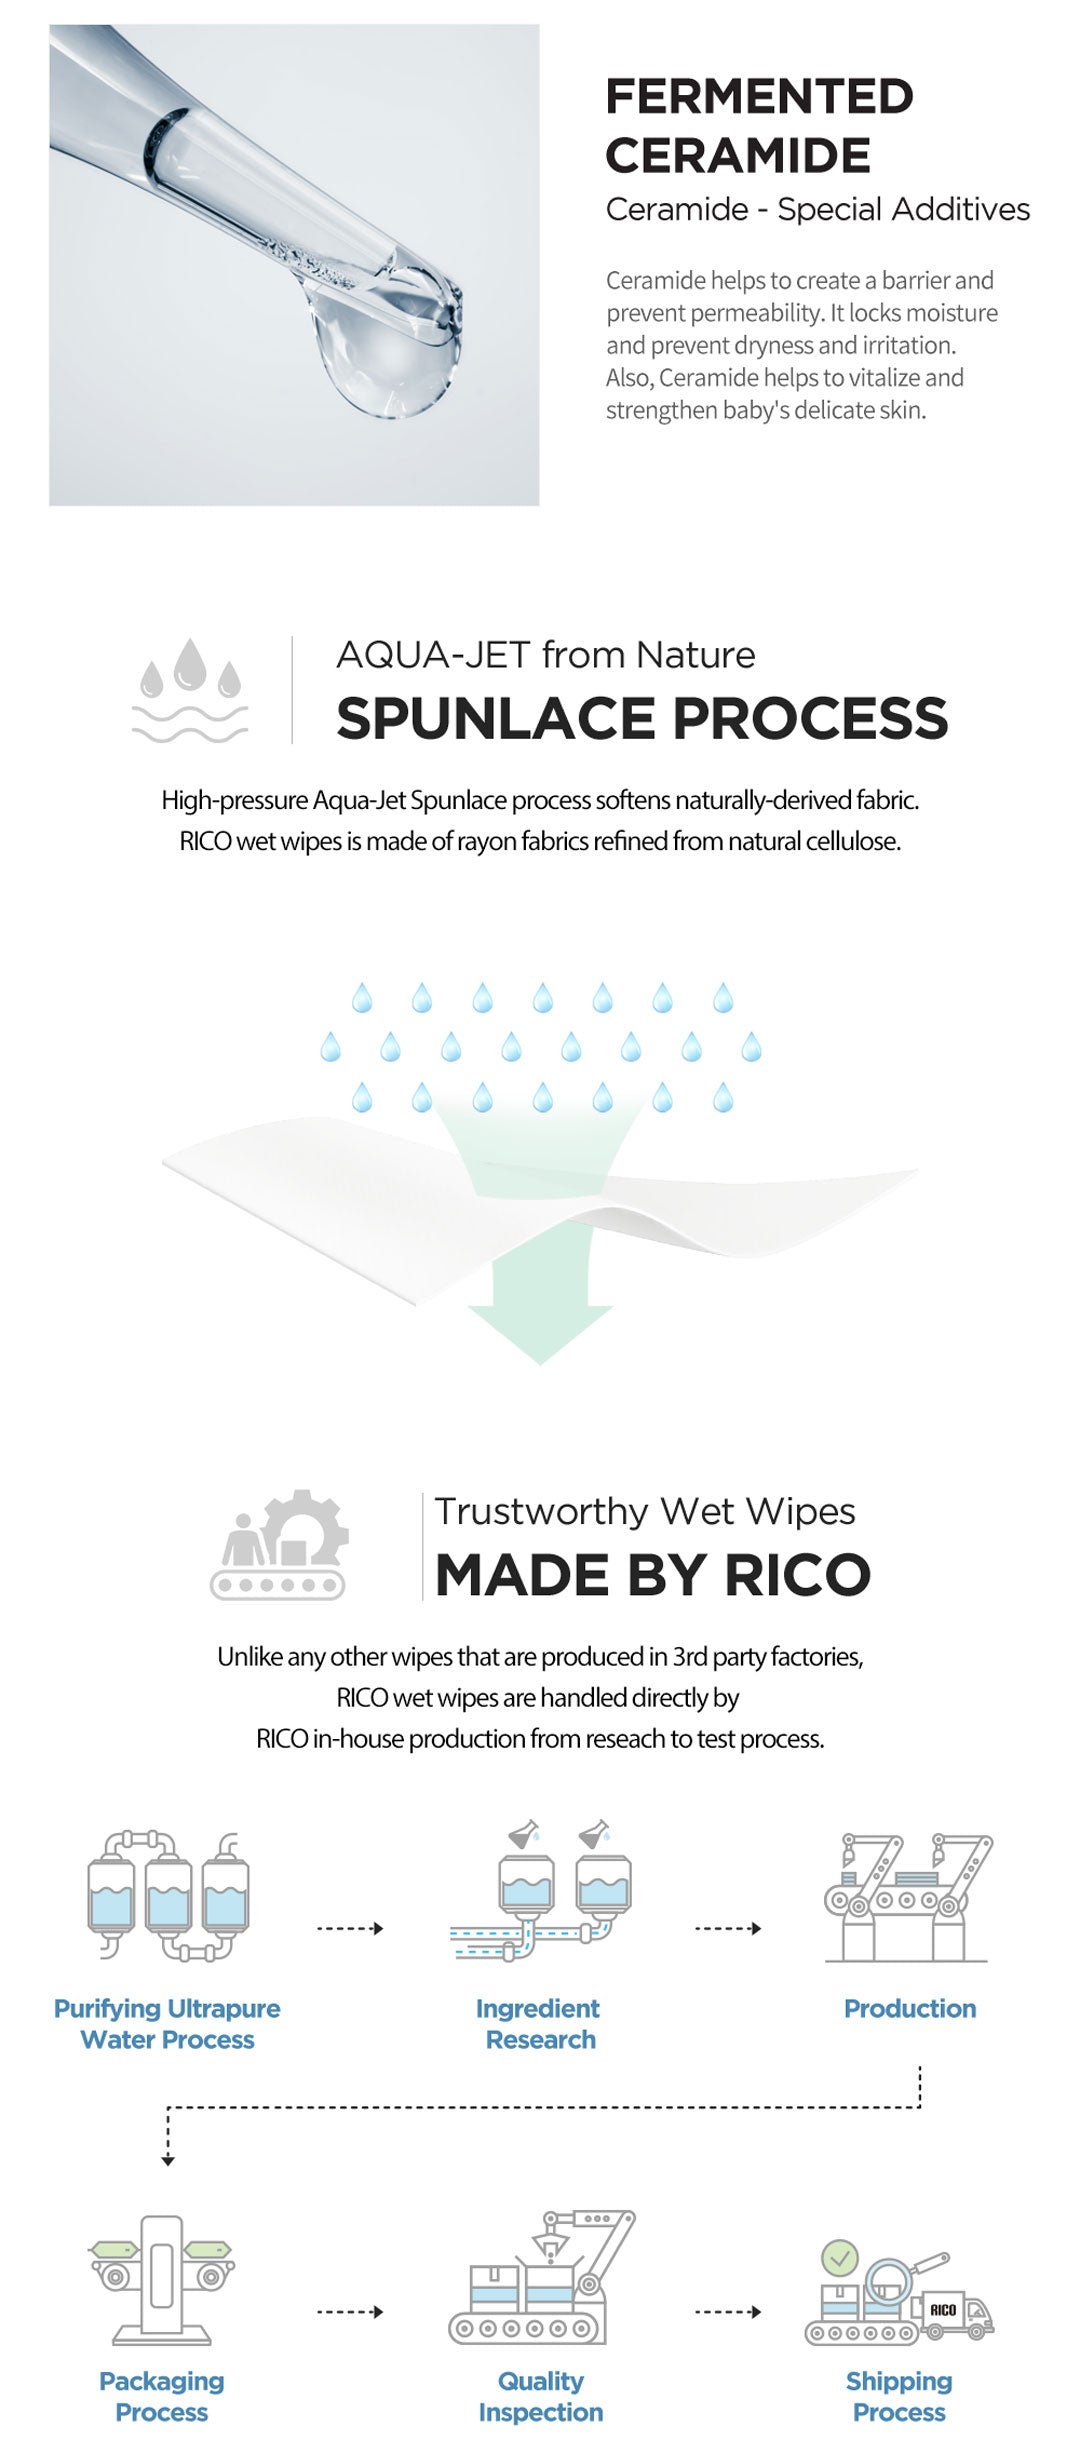 Rico Wet Wipes Production Process